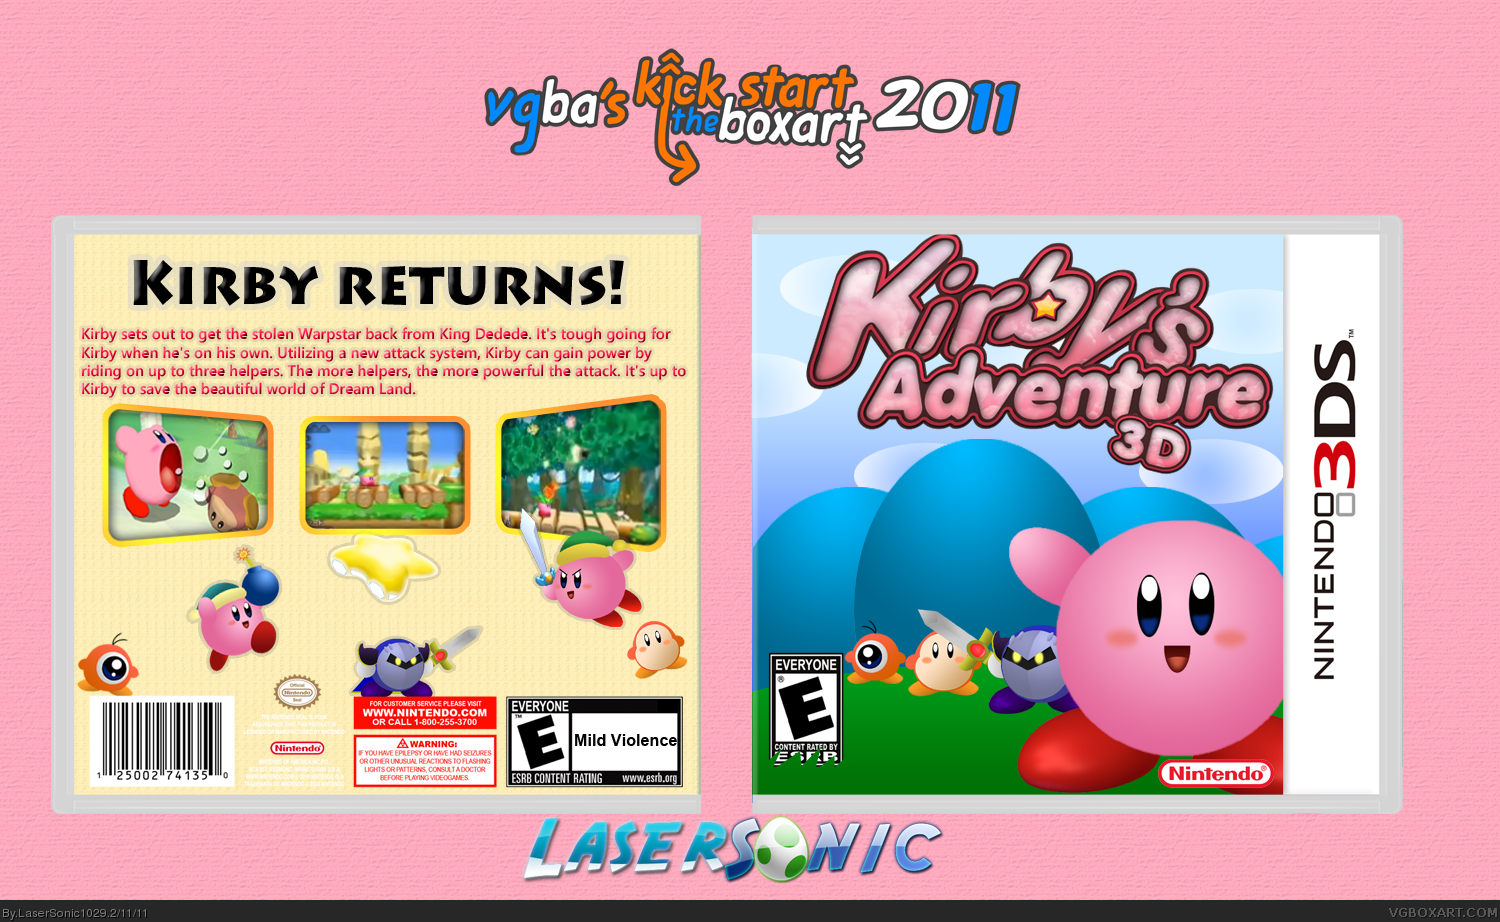 Kirby's Adventure 3D box cover